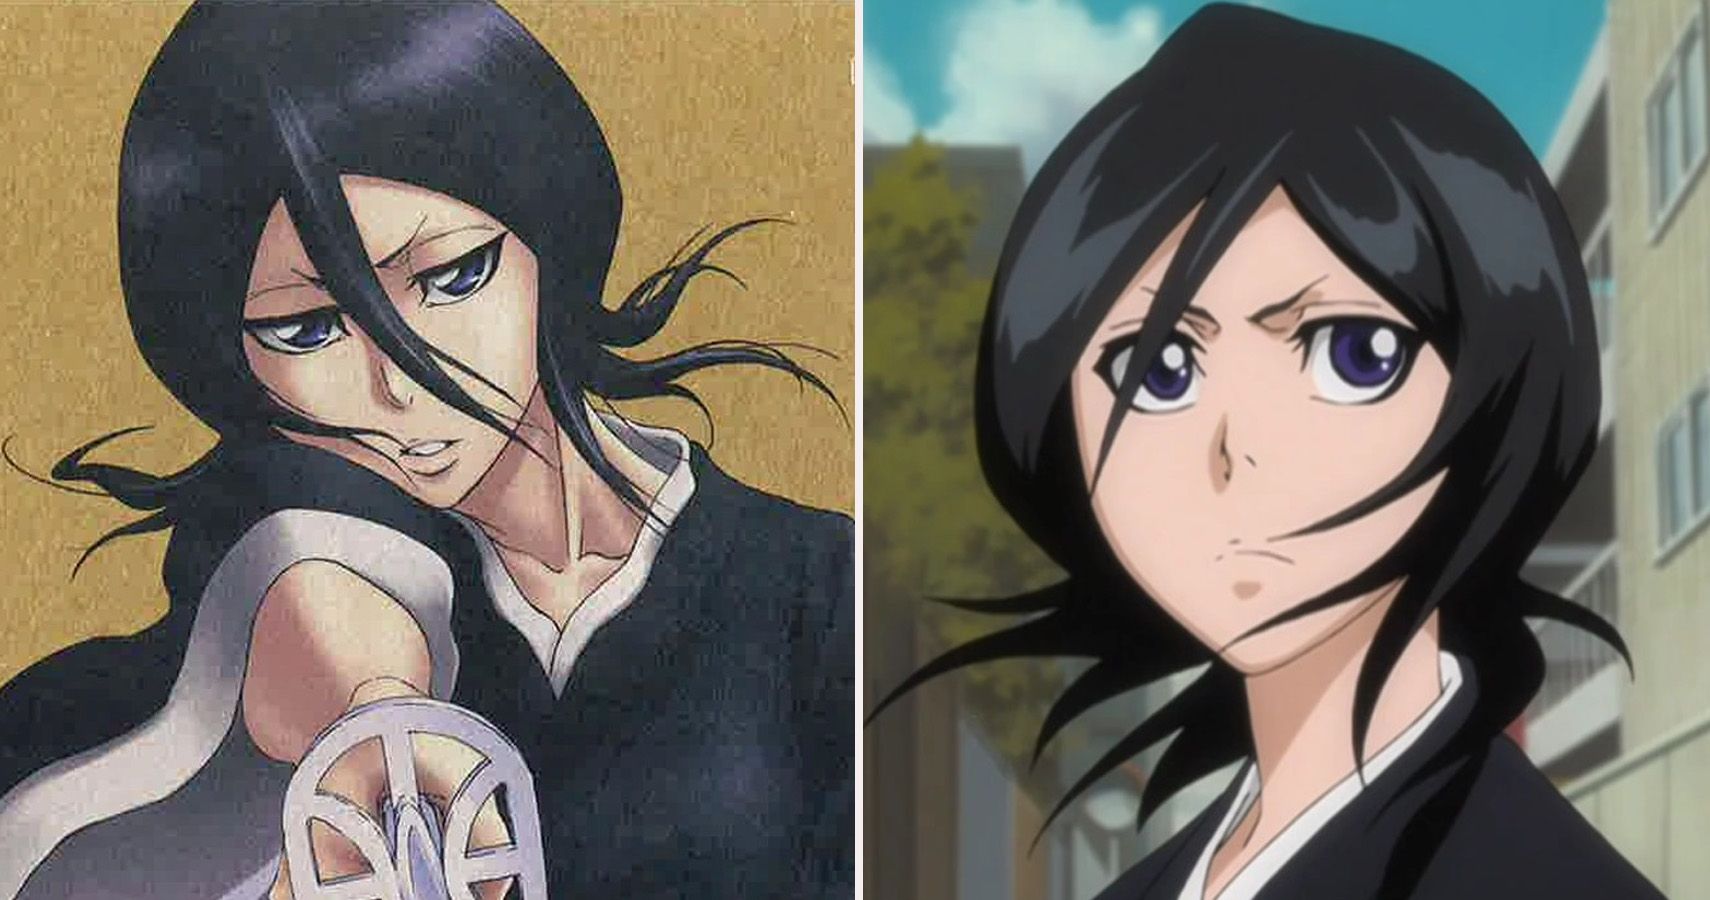 Bleach: Thousand-year Blood War - Where does part 1 leave off in the manga  series